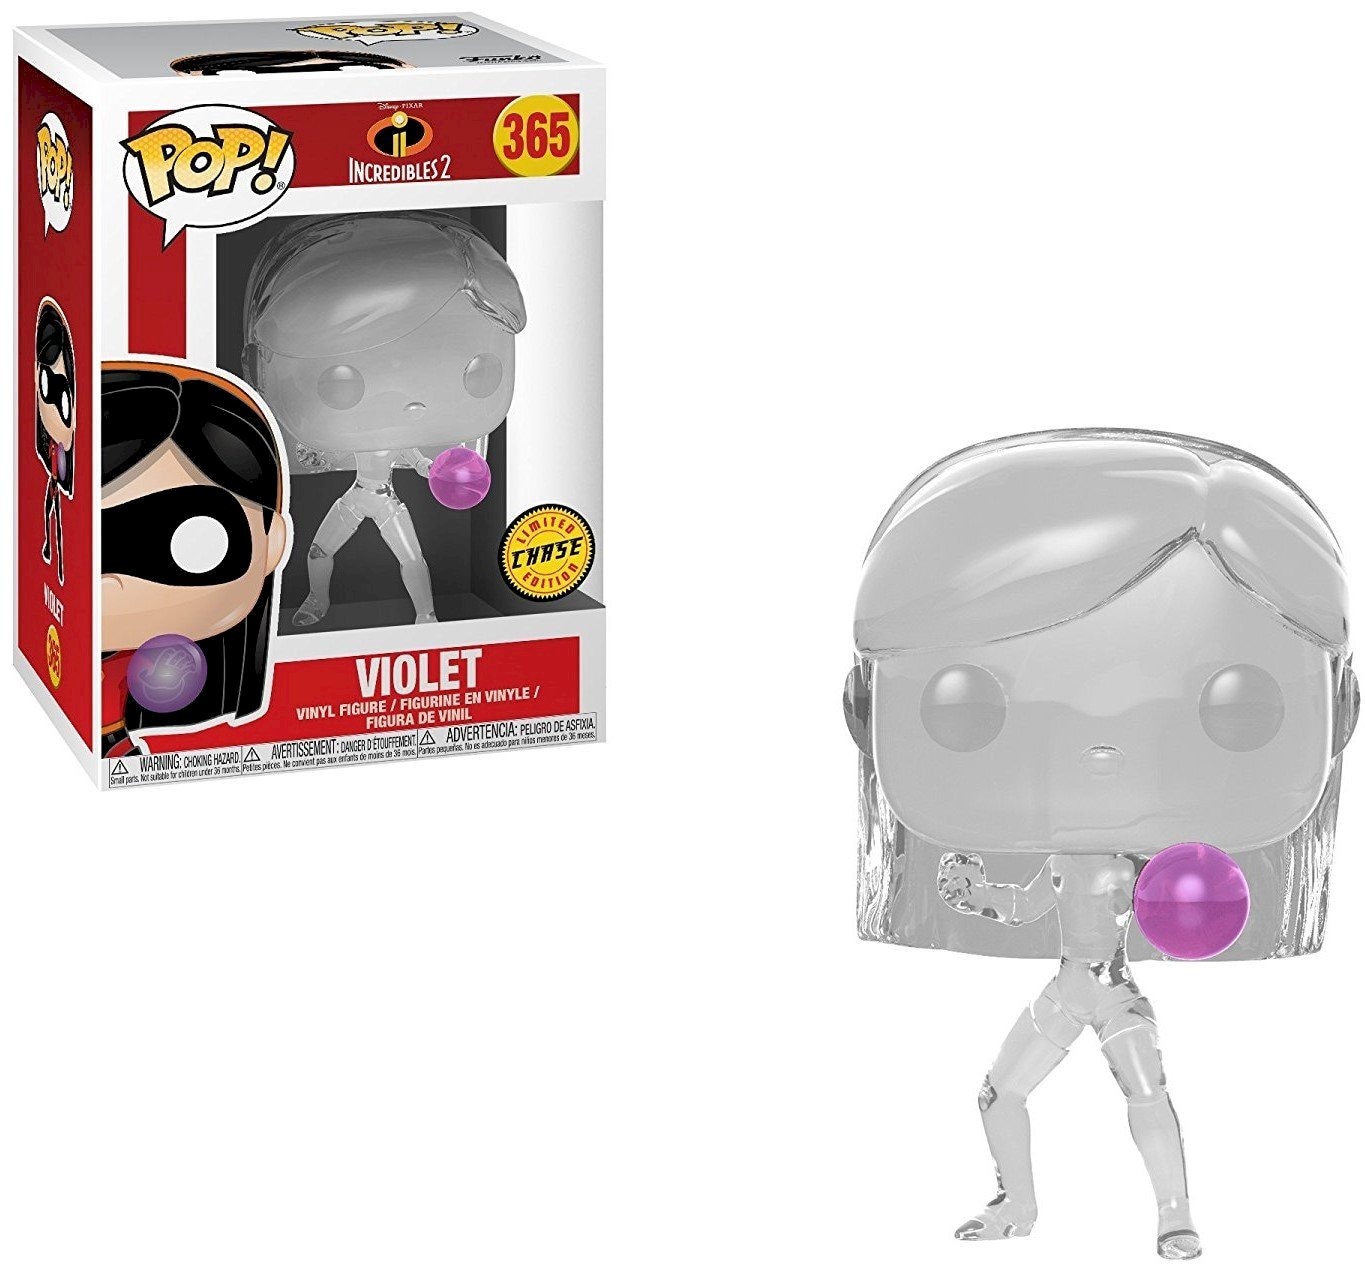 Incredibles 2 Funko POP Violet (Chase) 365 - 1